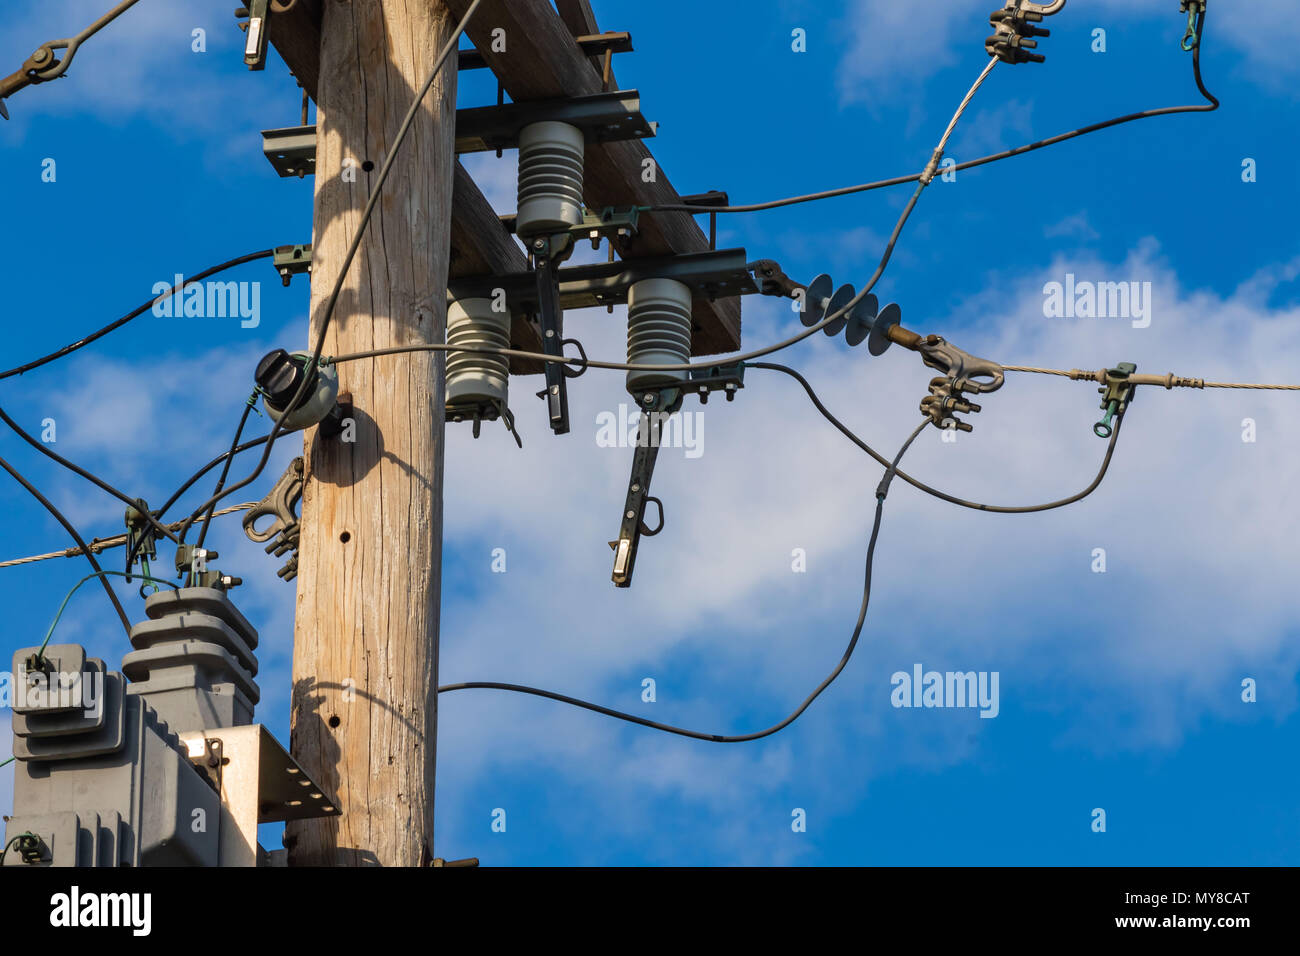 some electrical equipment high up on a pole four Stock Photo